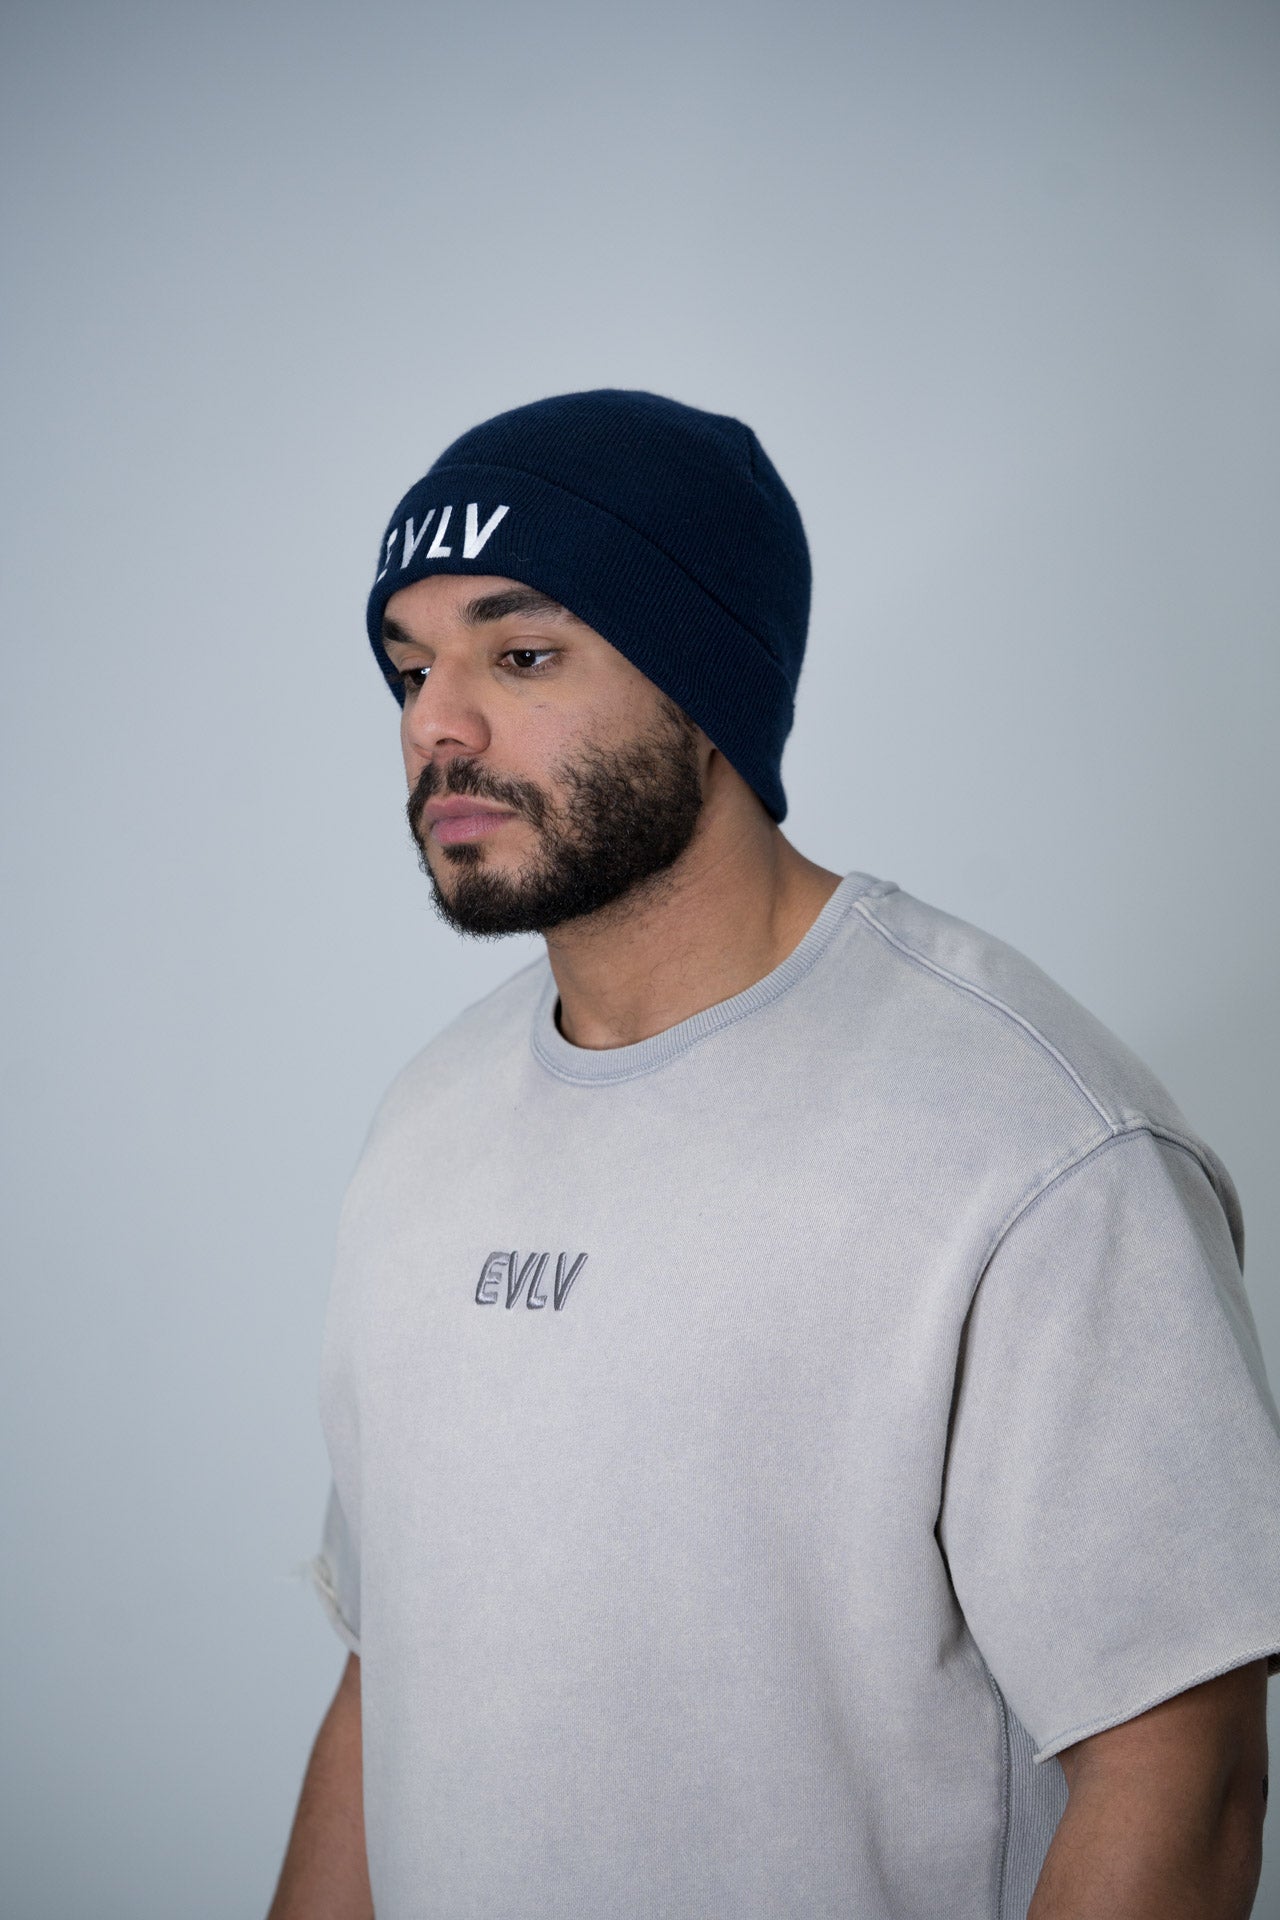 STORM Embroided Beanie